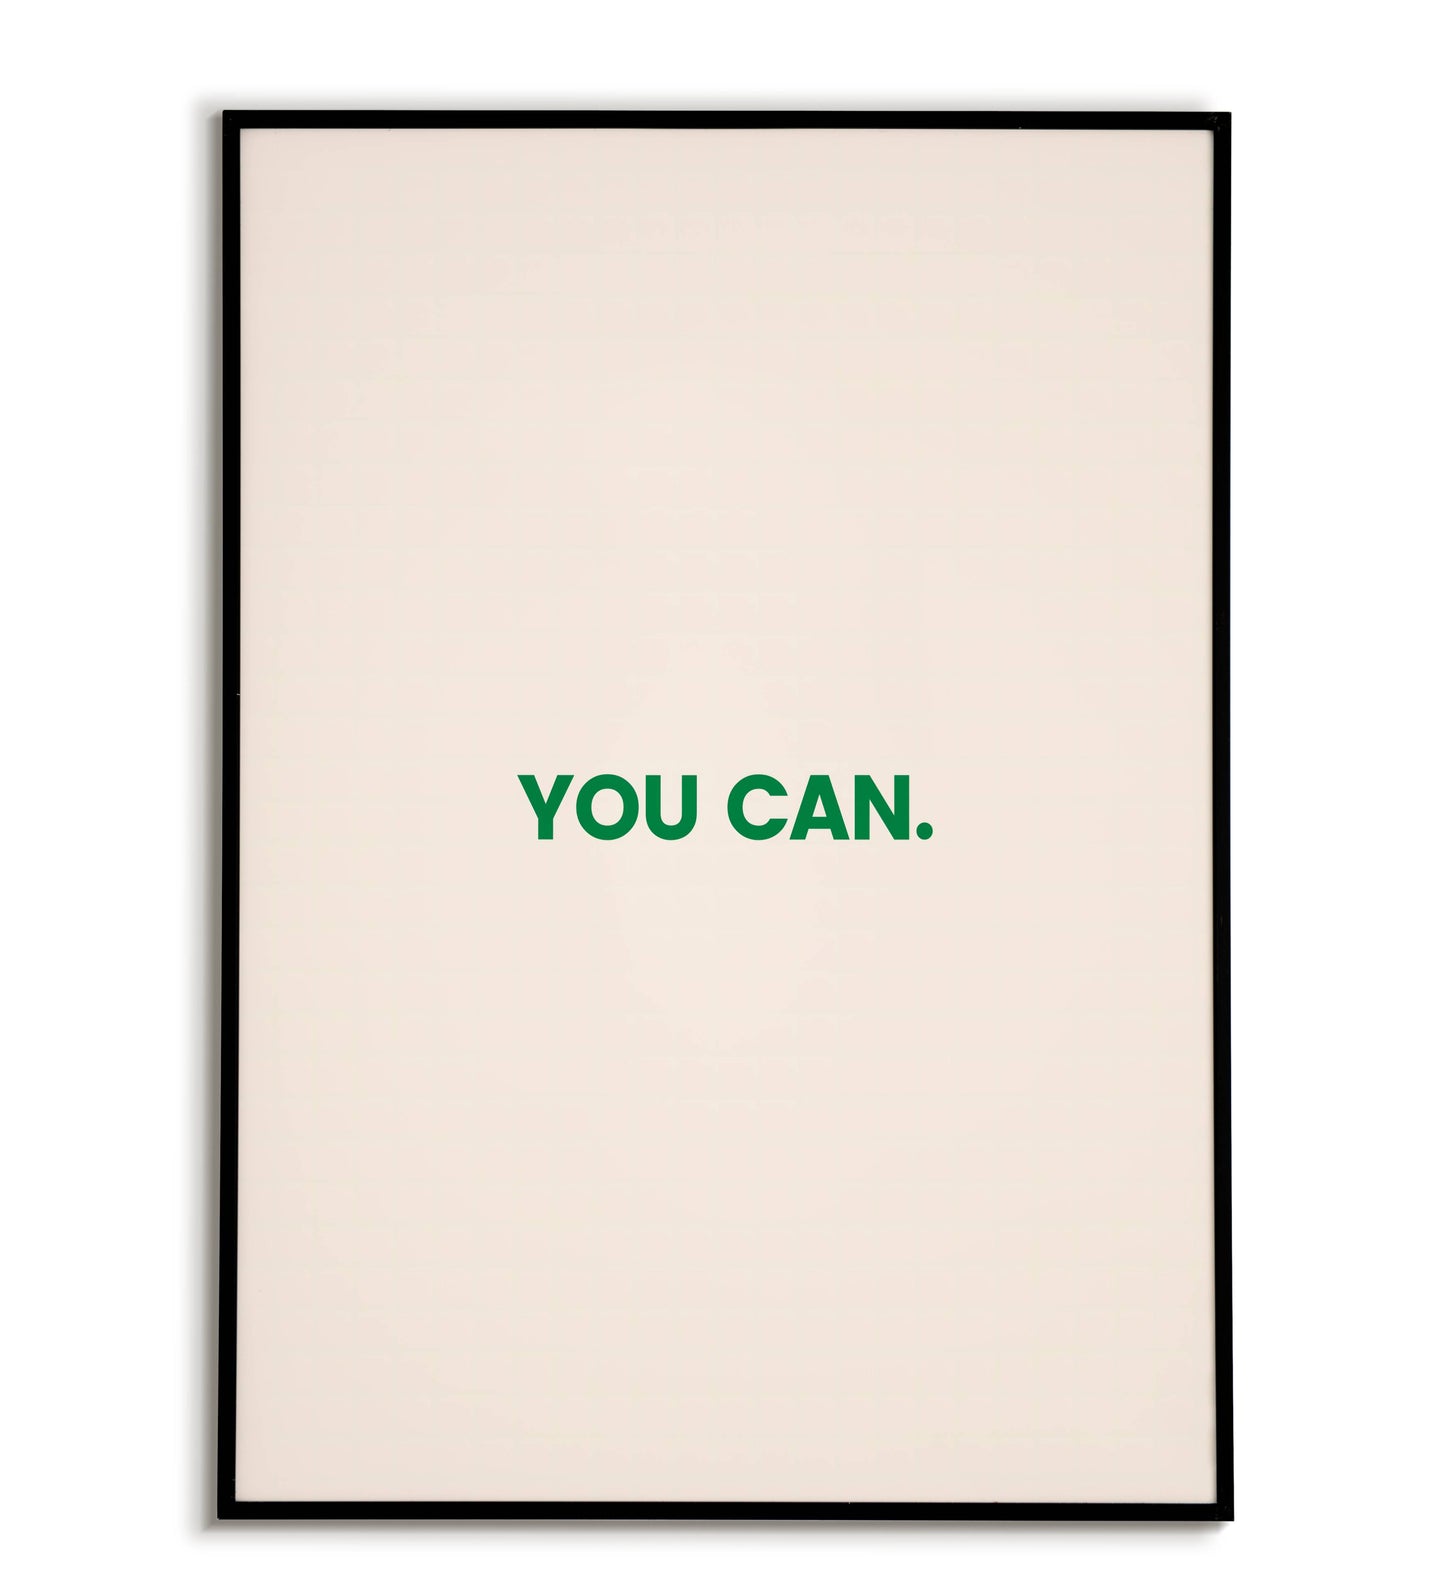 Motivational "You can" printable poster, promoting self-belief and possibility.	